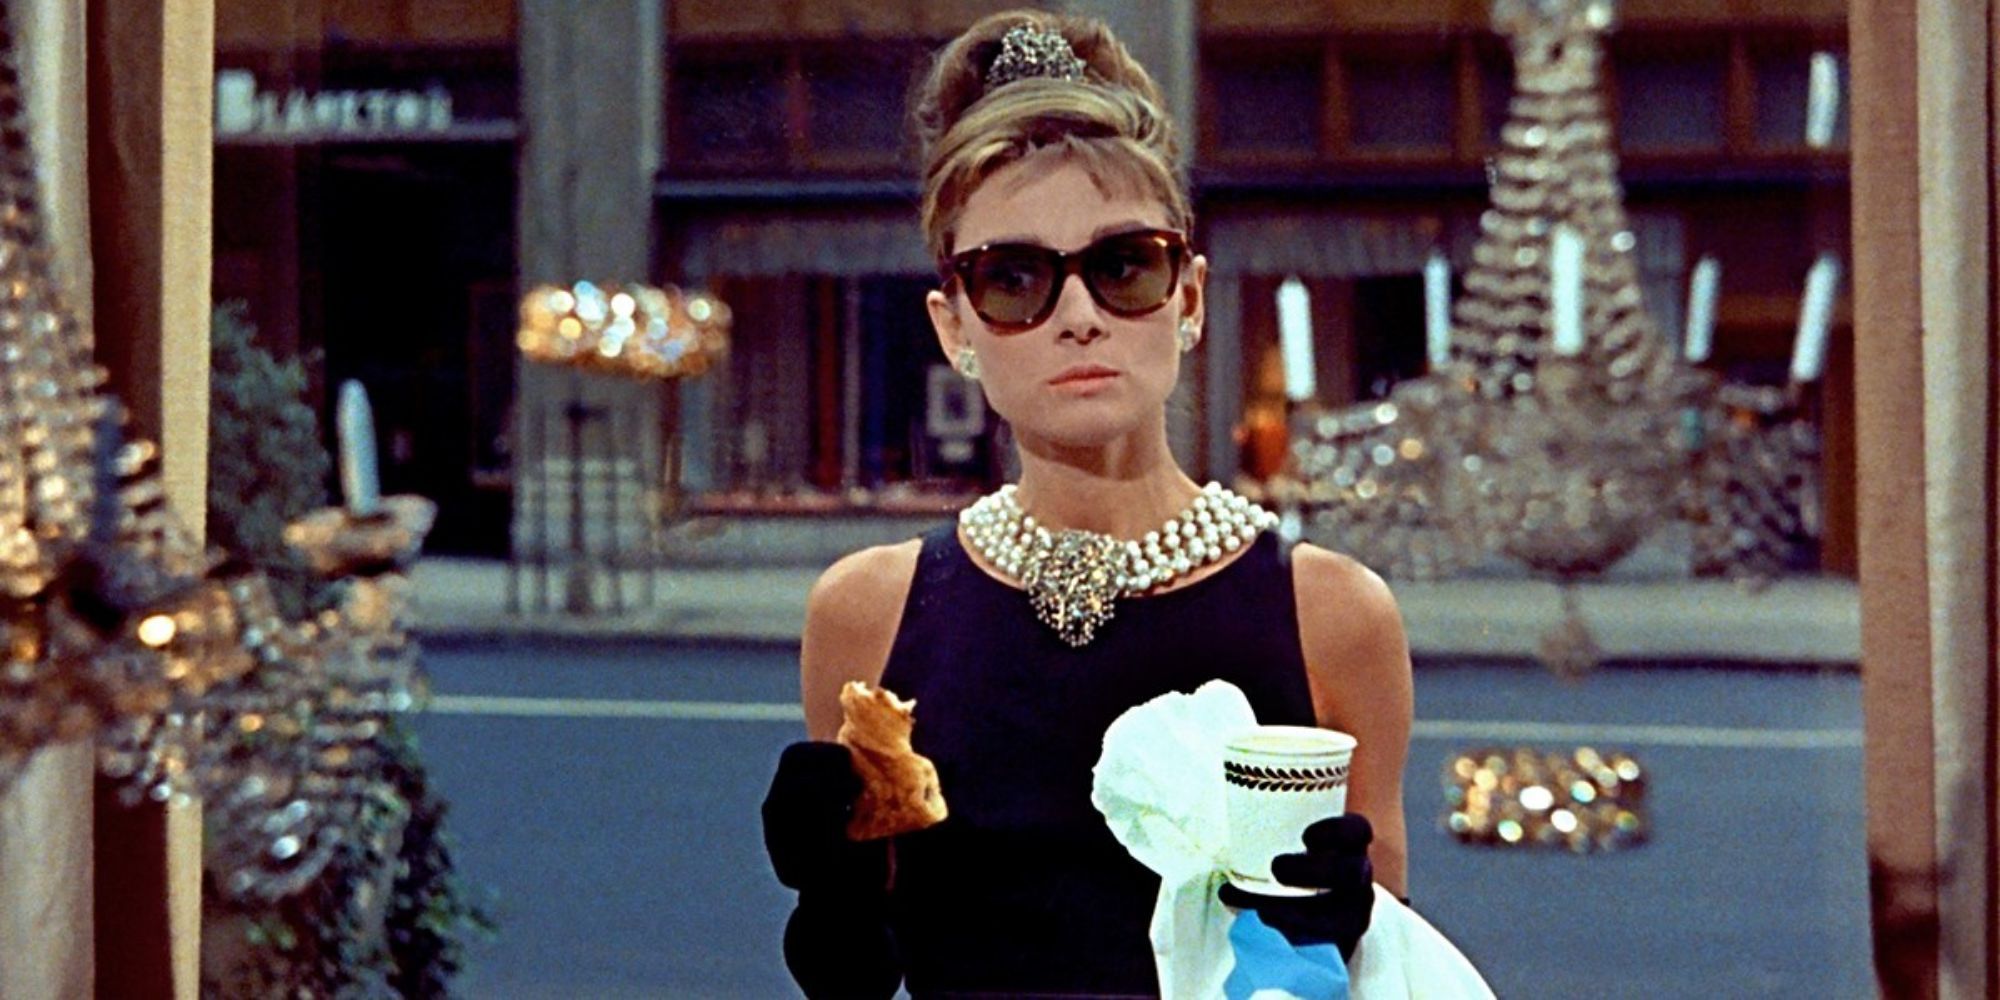 Audrey Hepburn as Holly Golightly holding a bagle and a cup of coffee in Breakfast at Tiffany's